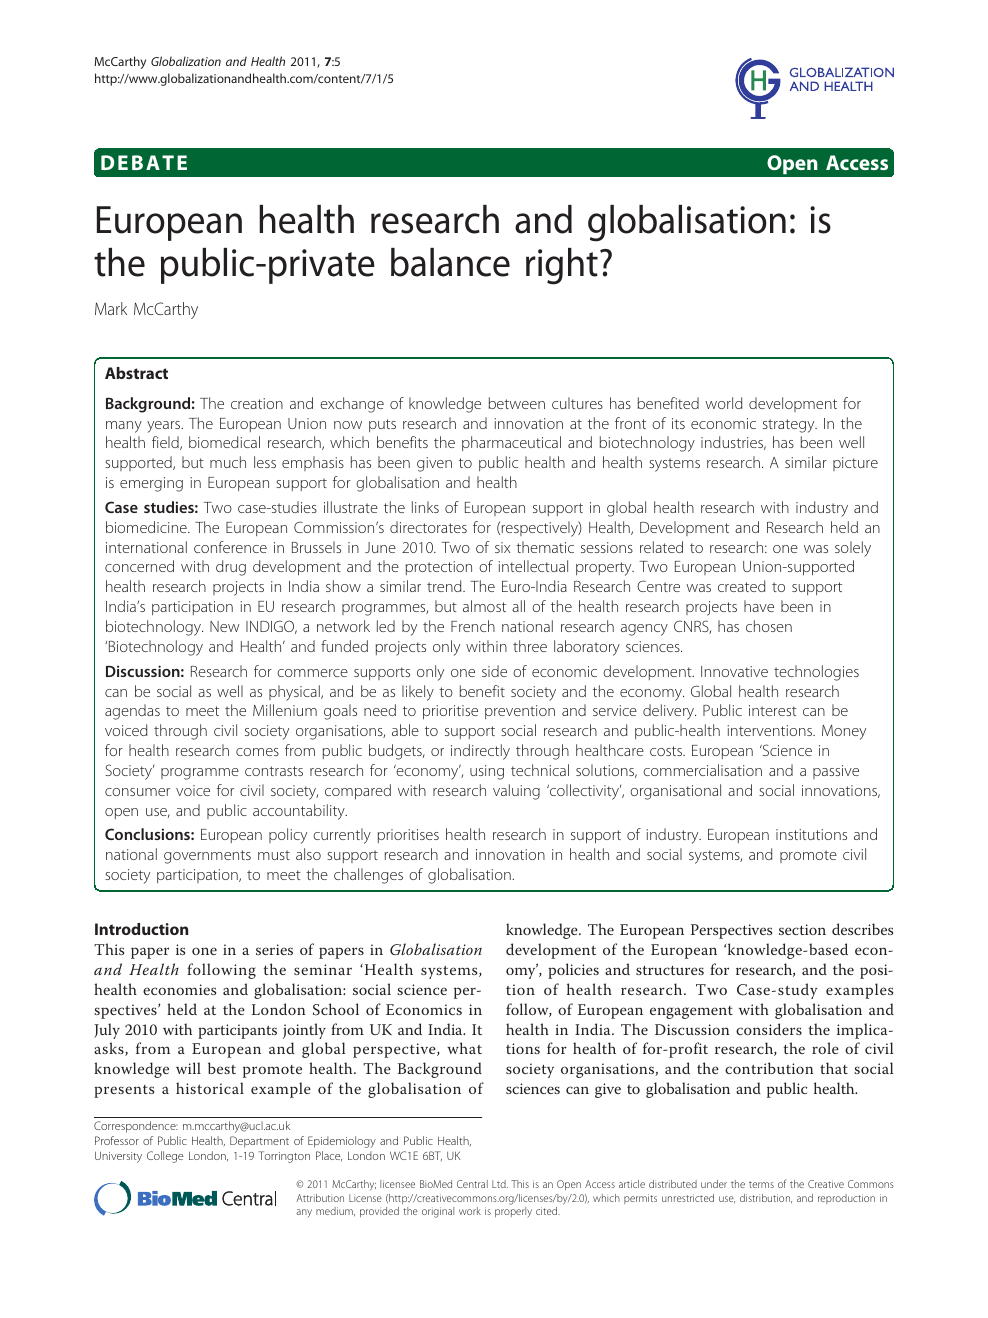 European health research and globalisation: is the public-private